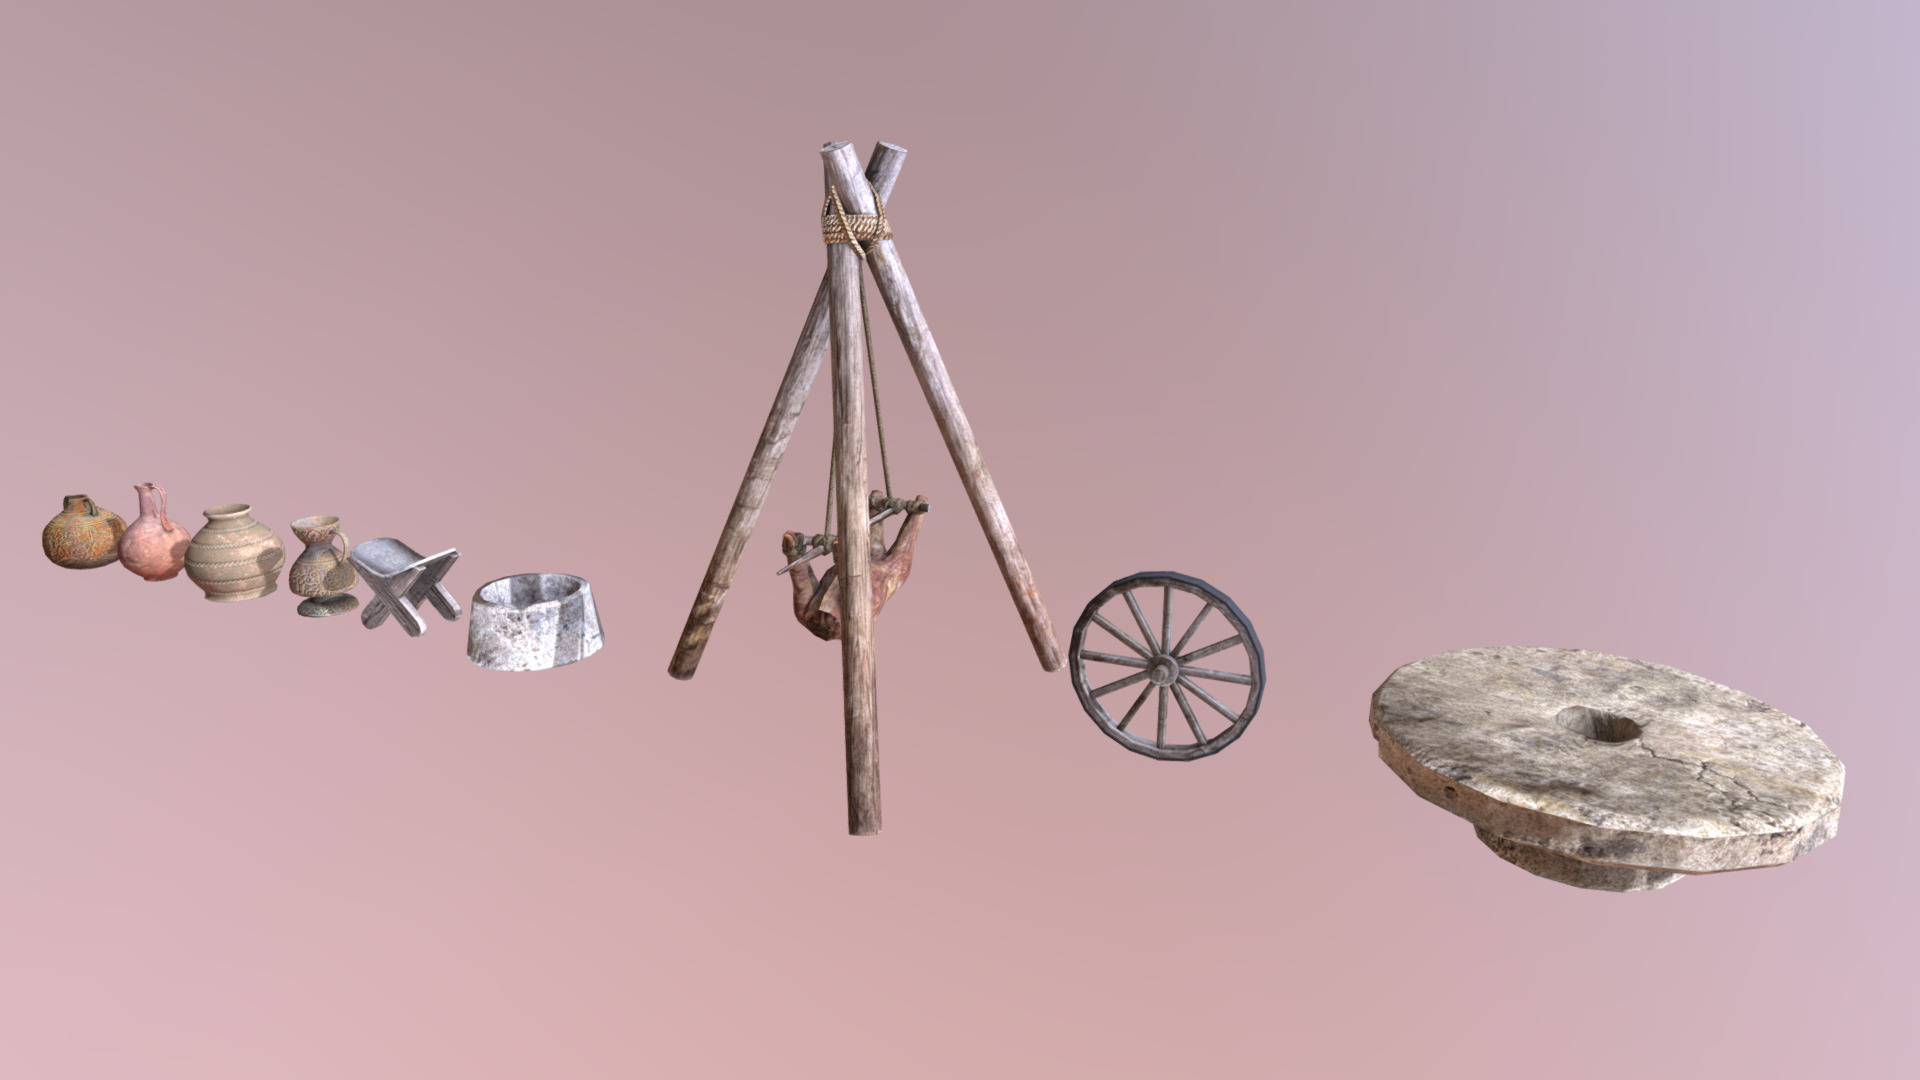 3D model Low Poly Midleeastern Objects Pack - This is a 3D model of the Low Poly Midleeastern Objects Pack. The 3D model is about a metal contraption with wheels.